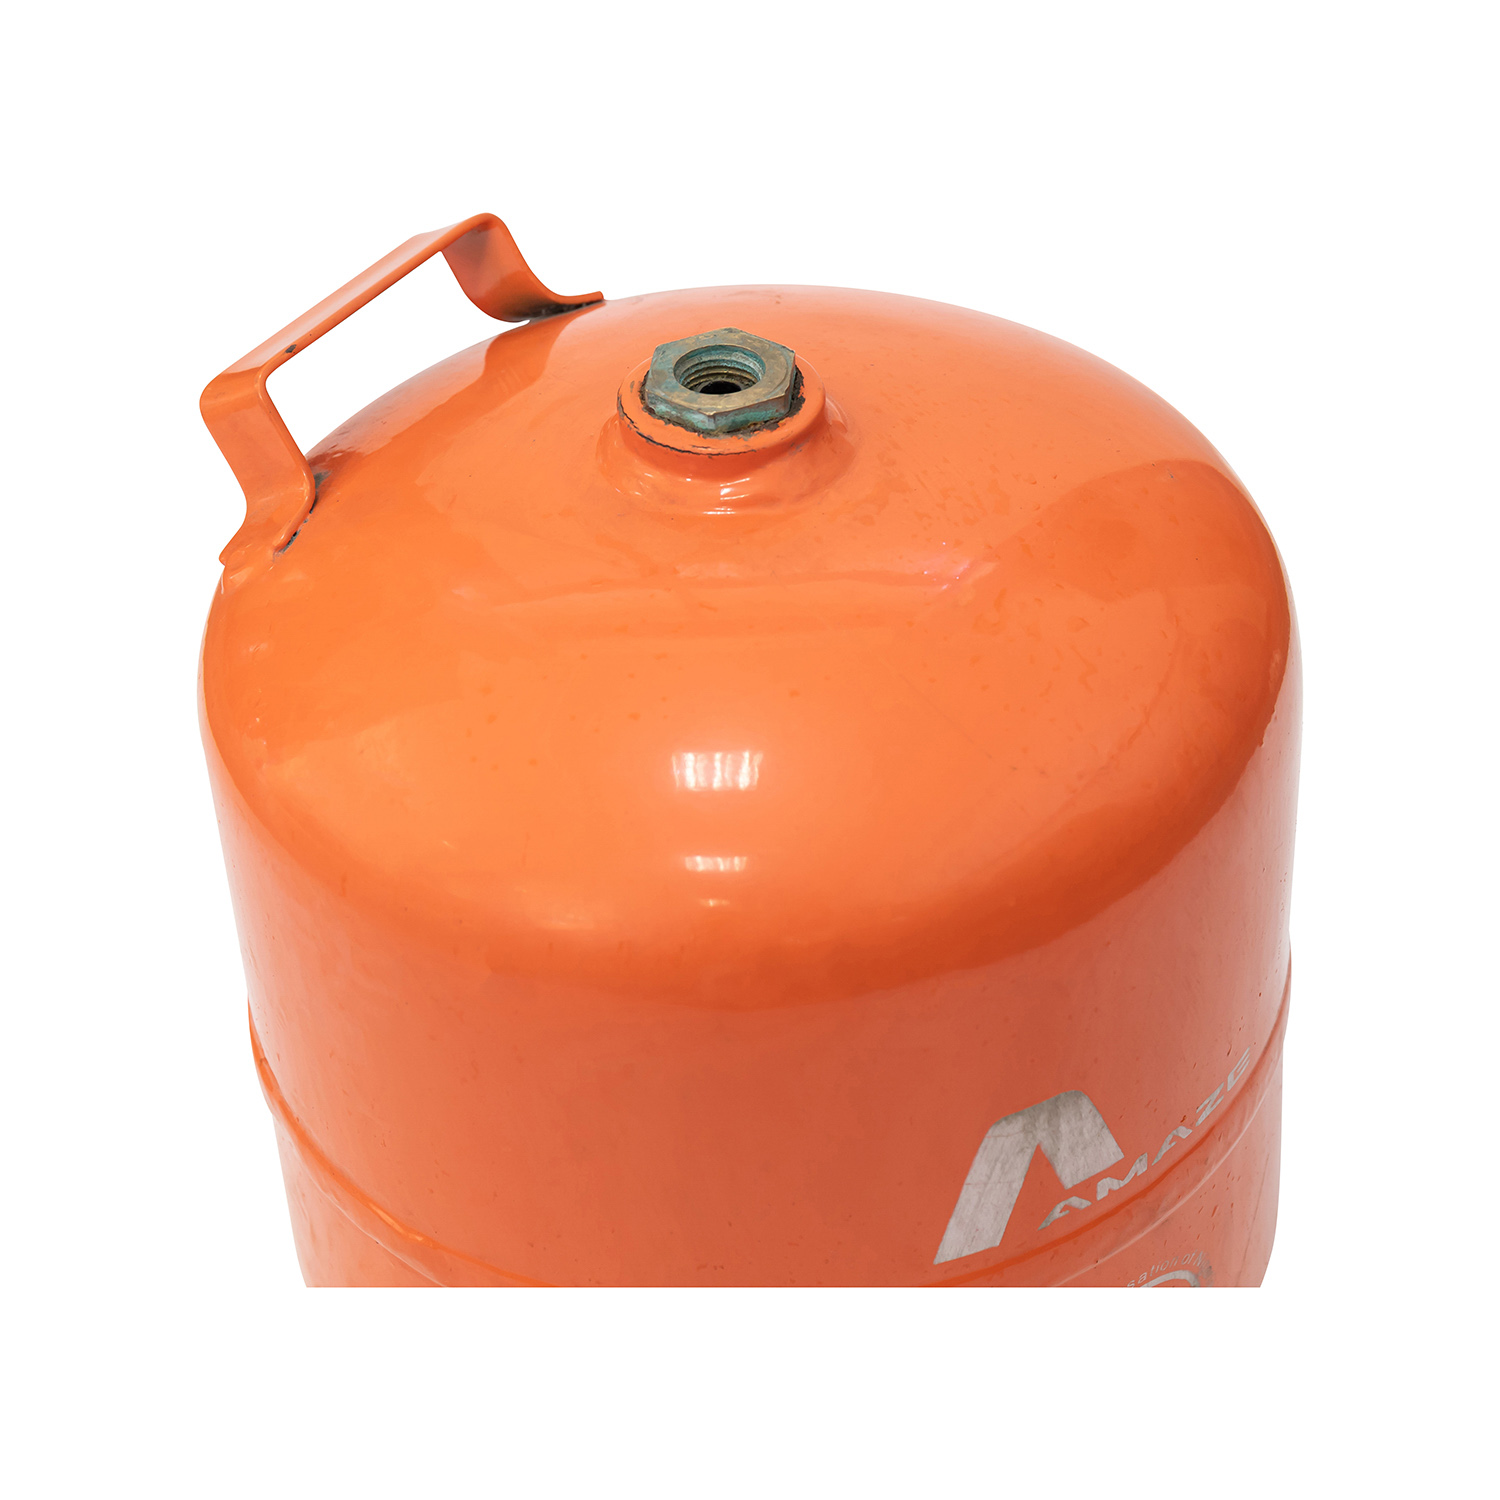 3kg Lpg Propane Gas Cylinder Tank Bottle for Camping Cooking